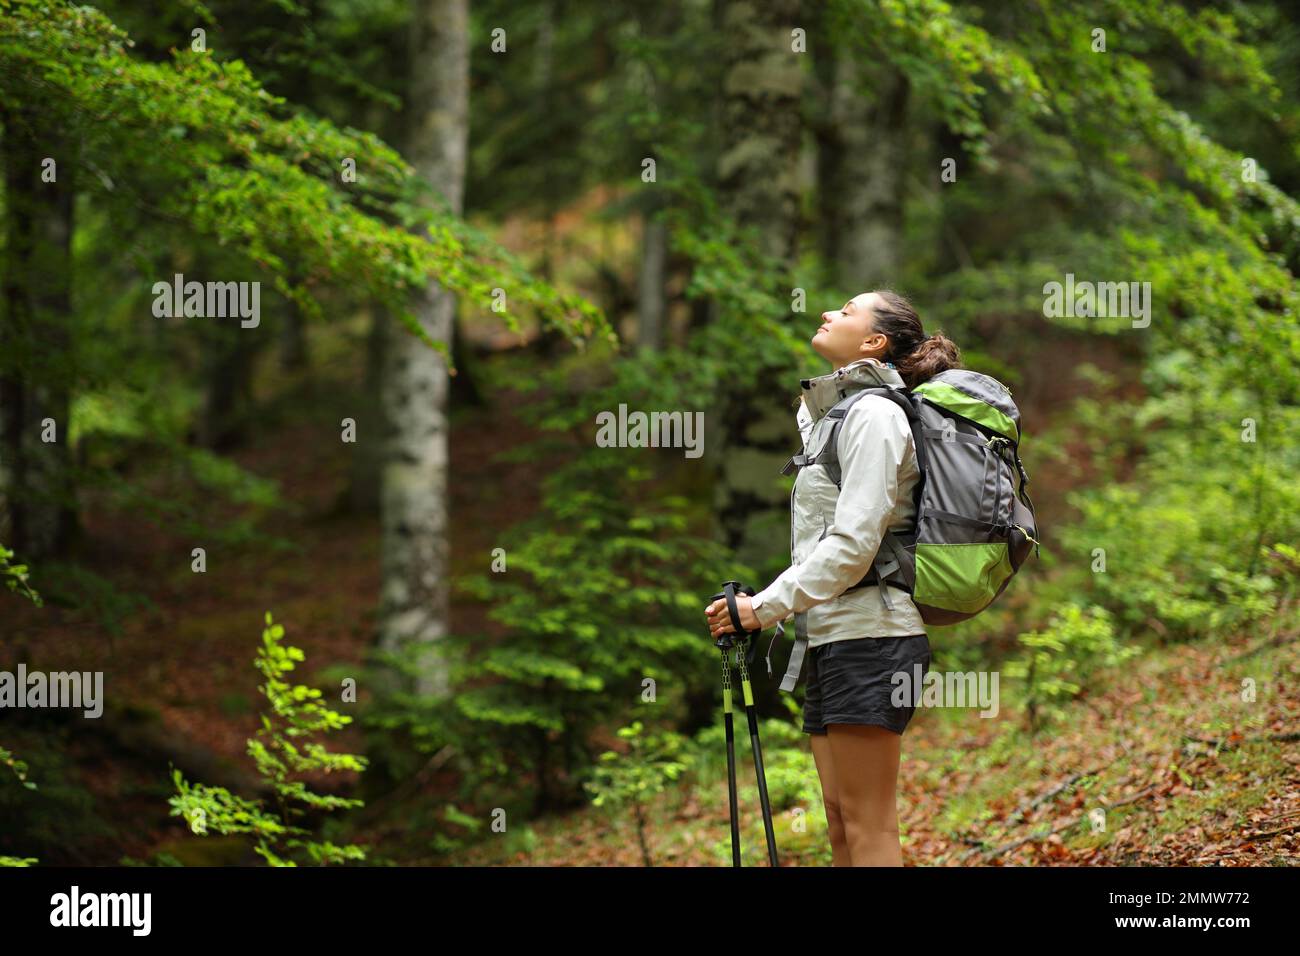 Hiker in a forest breathing fresh air standing alone Stock Photo - Alamy